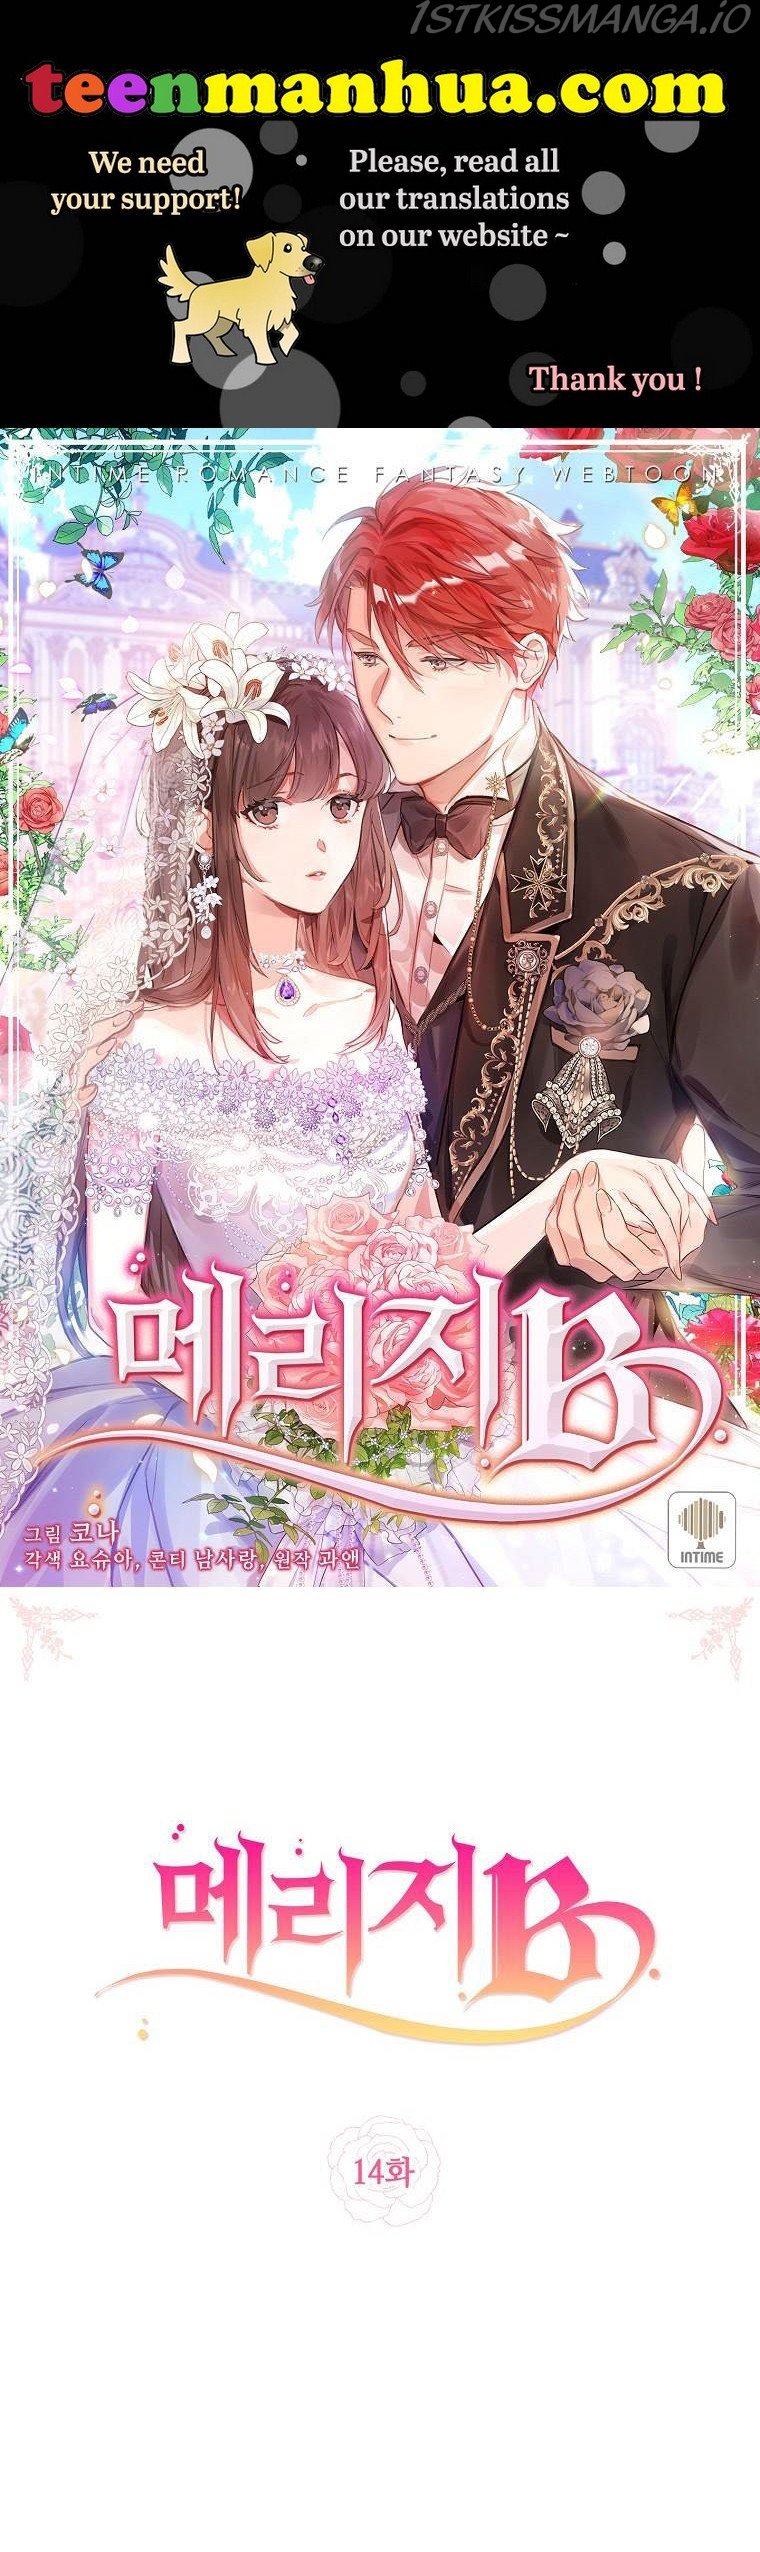 Marriage B chapter 14